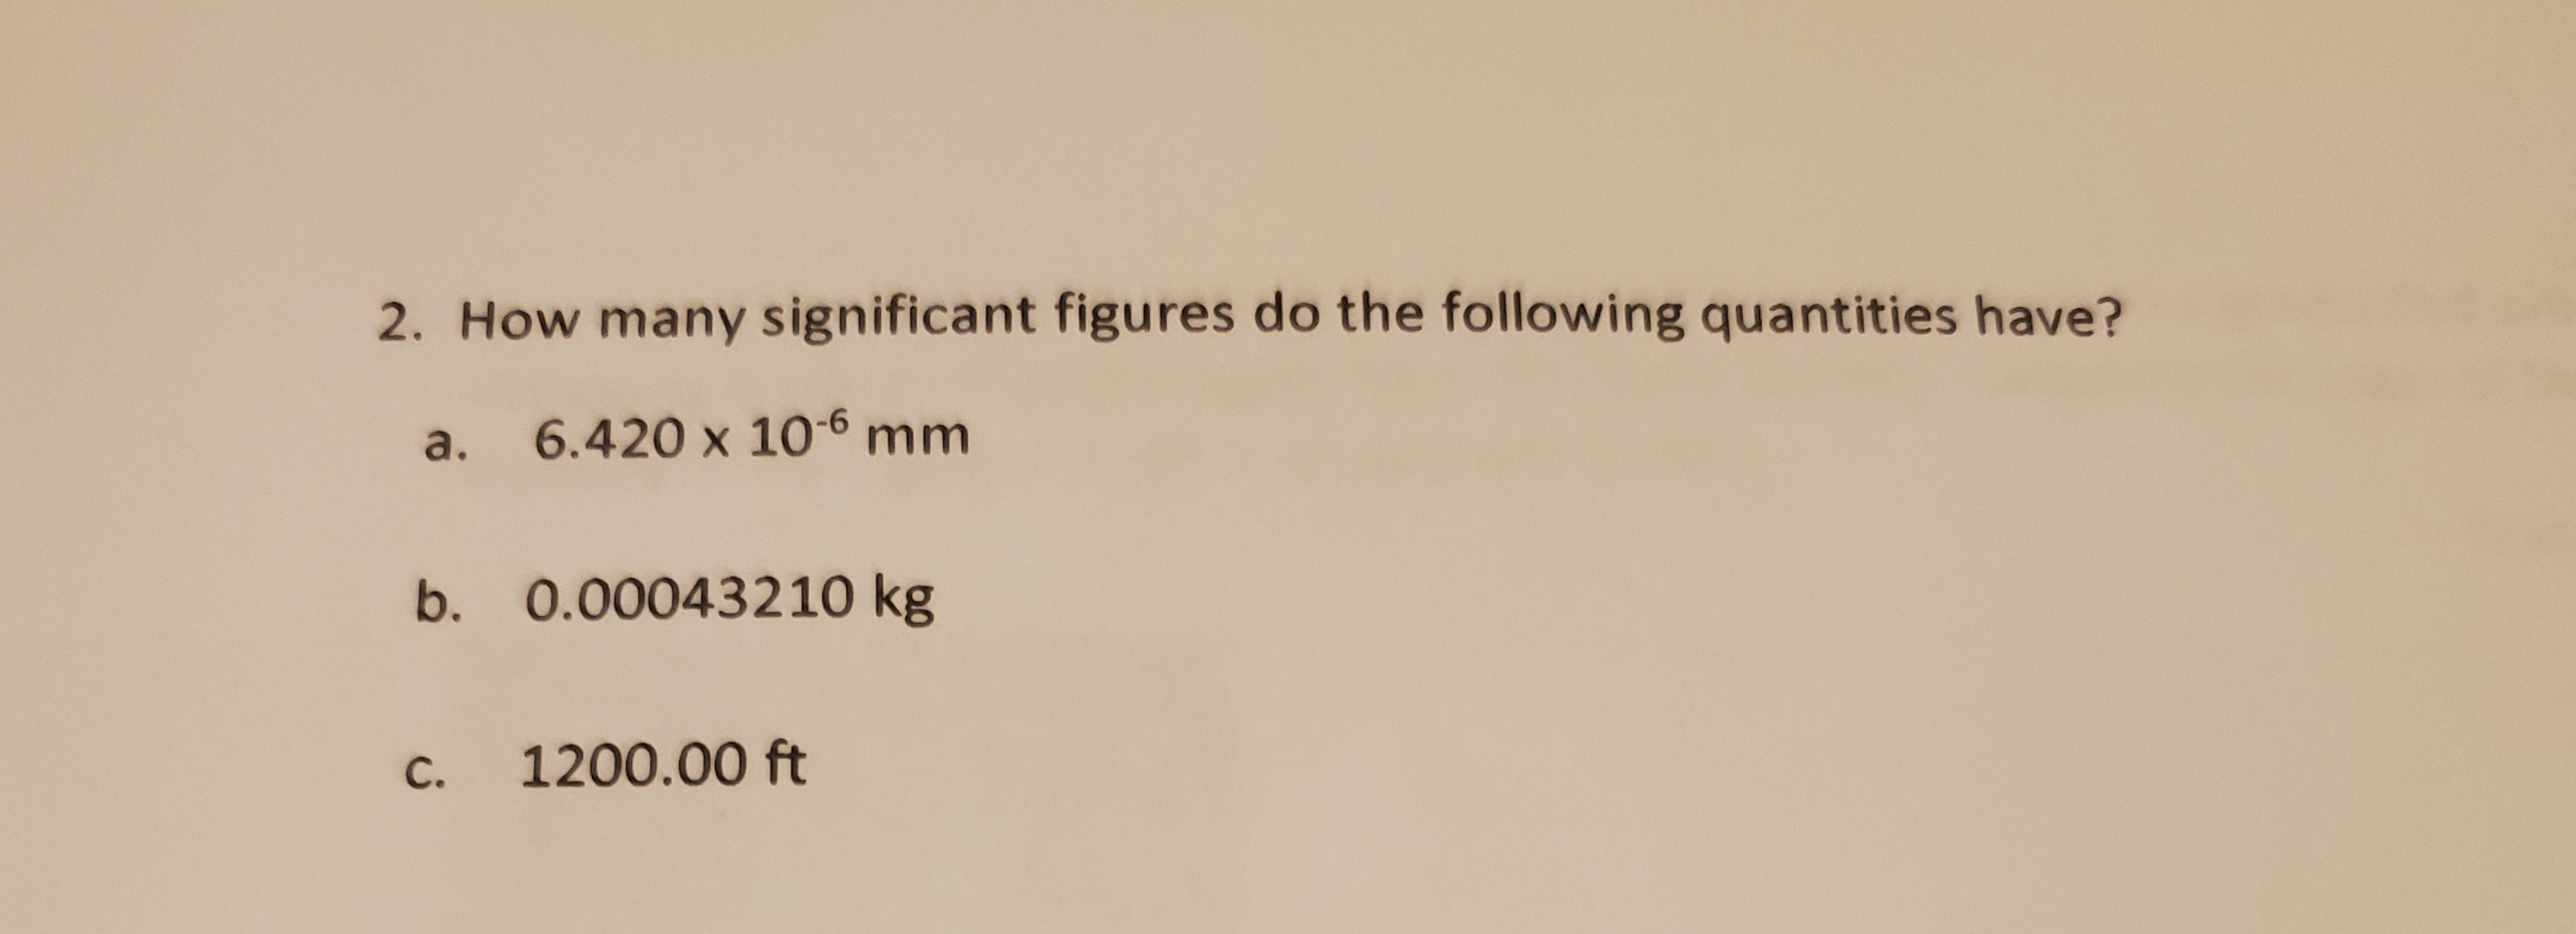 How many significant figures do the following quantities have?
a. 6.420 x 106 mm
b. 0.00043210 kg
1200.00 ft
